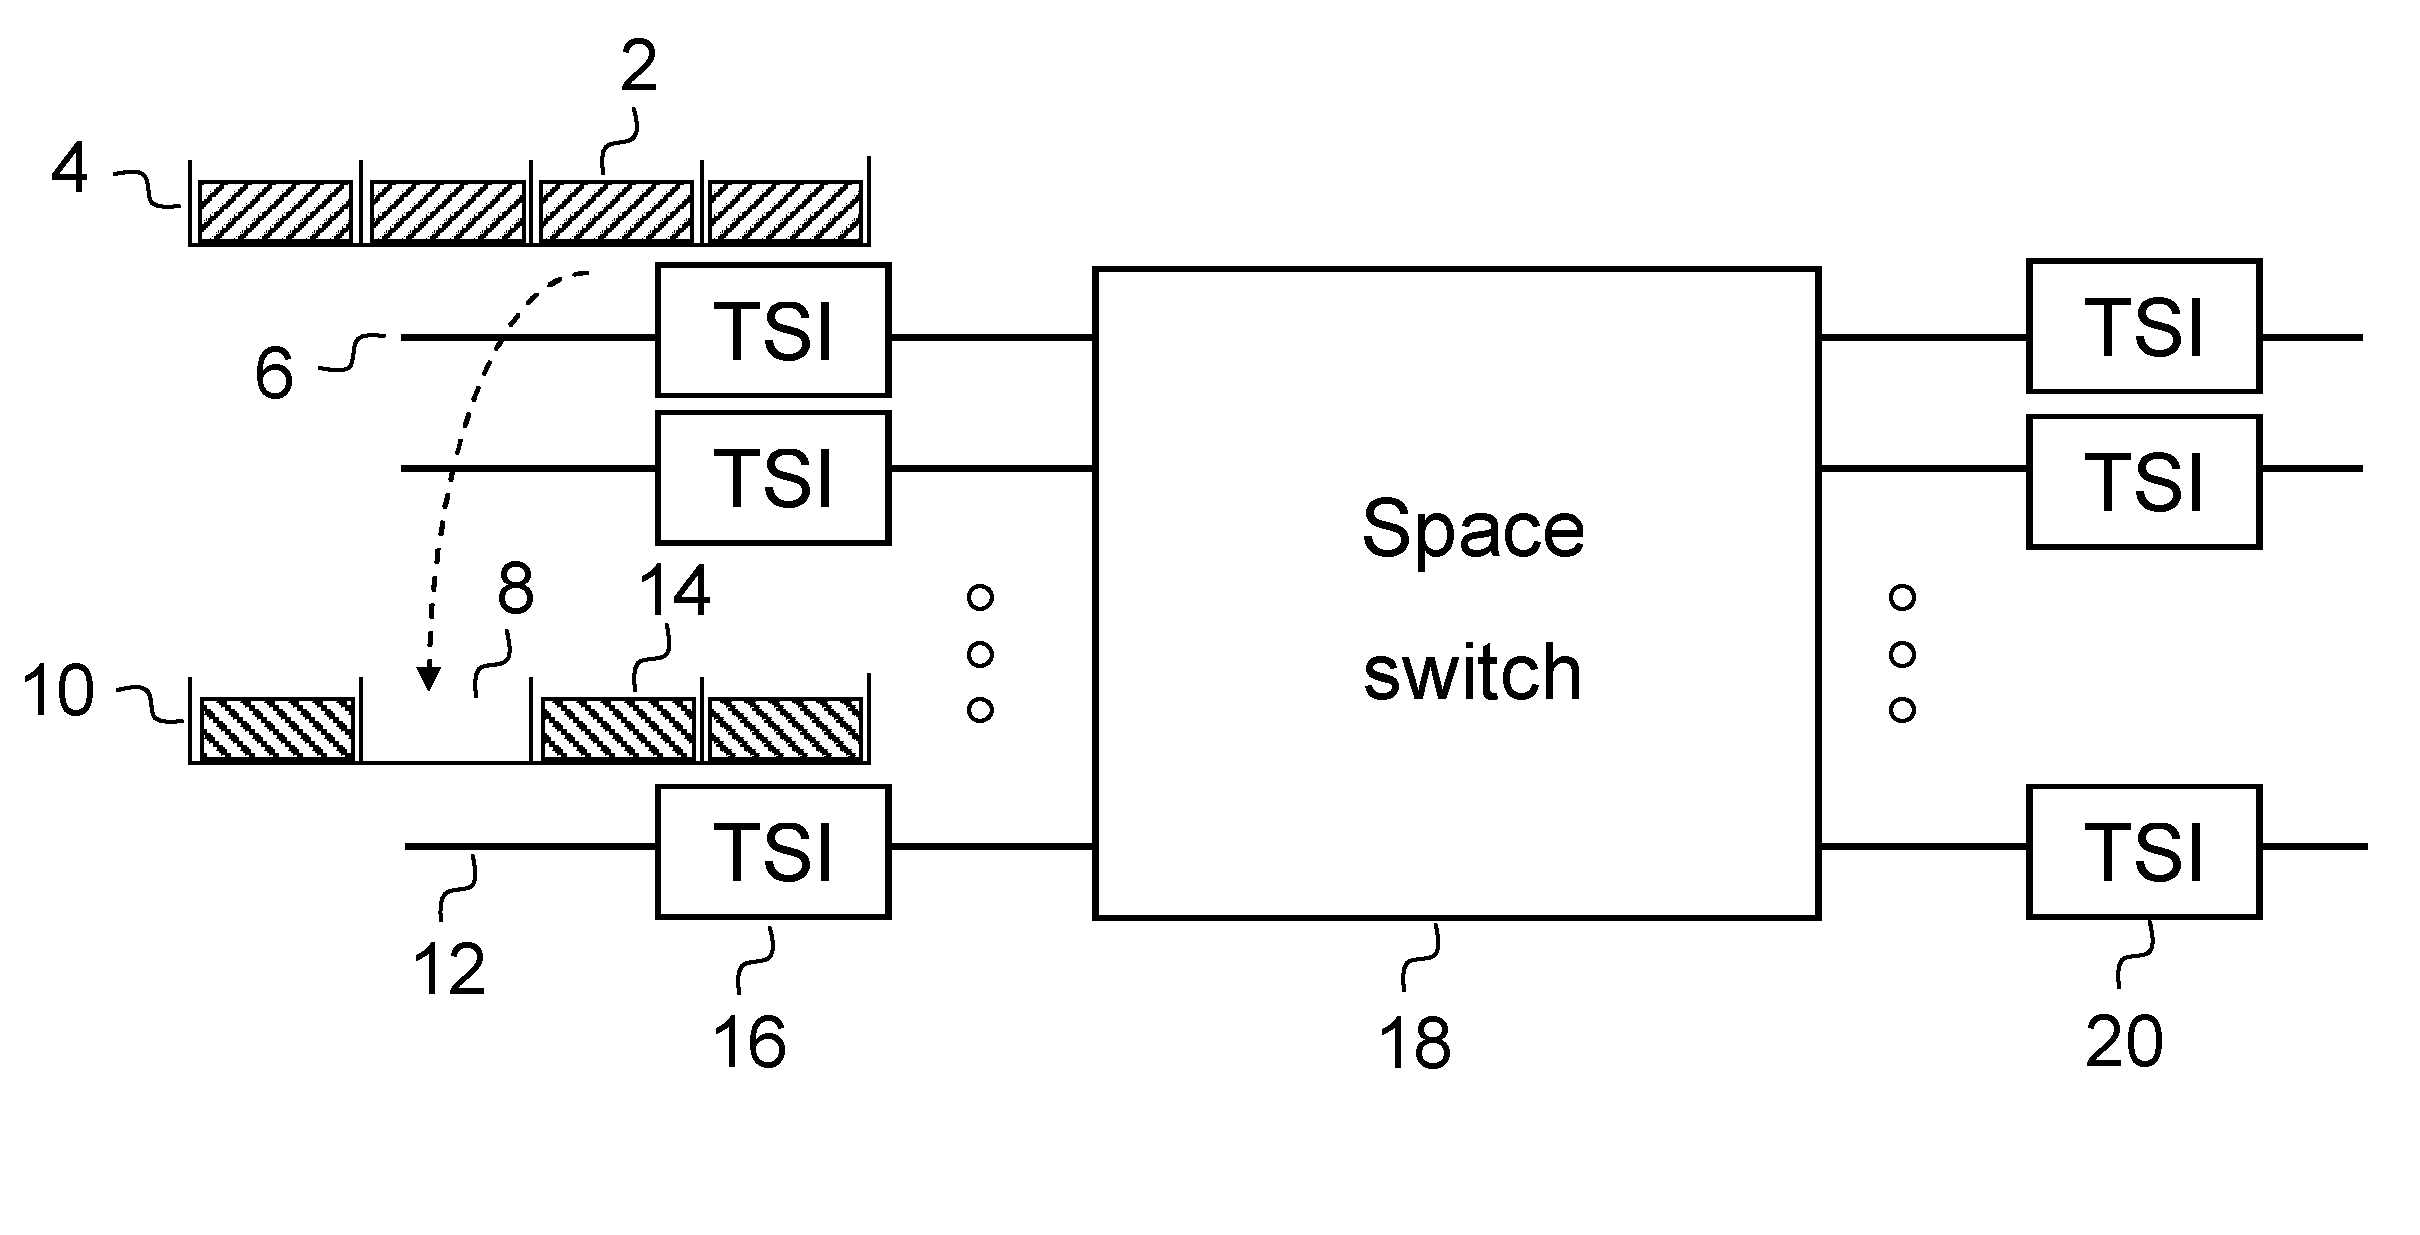 Time multiplexed space switch